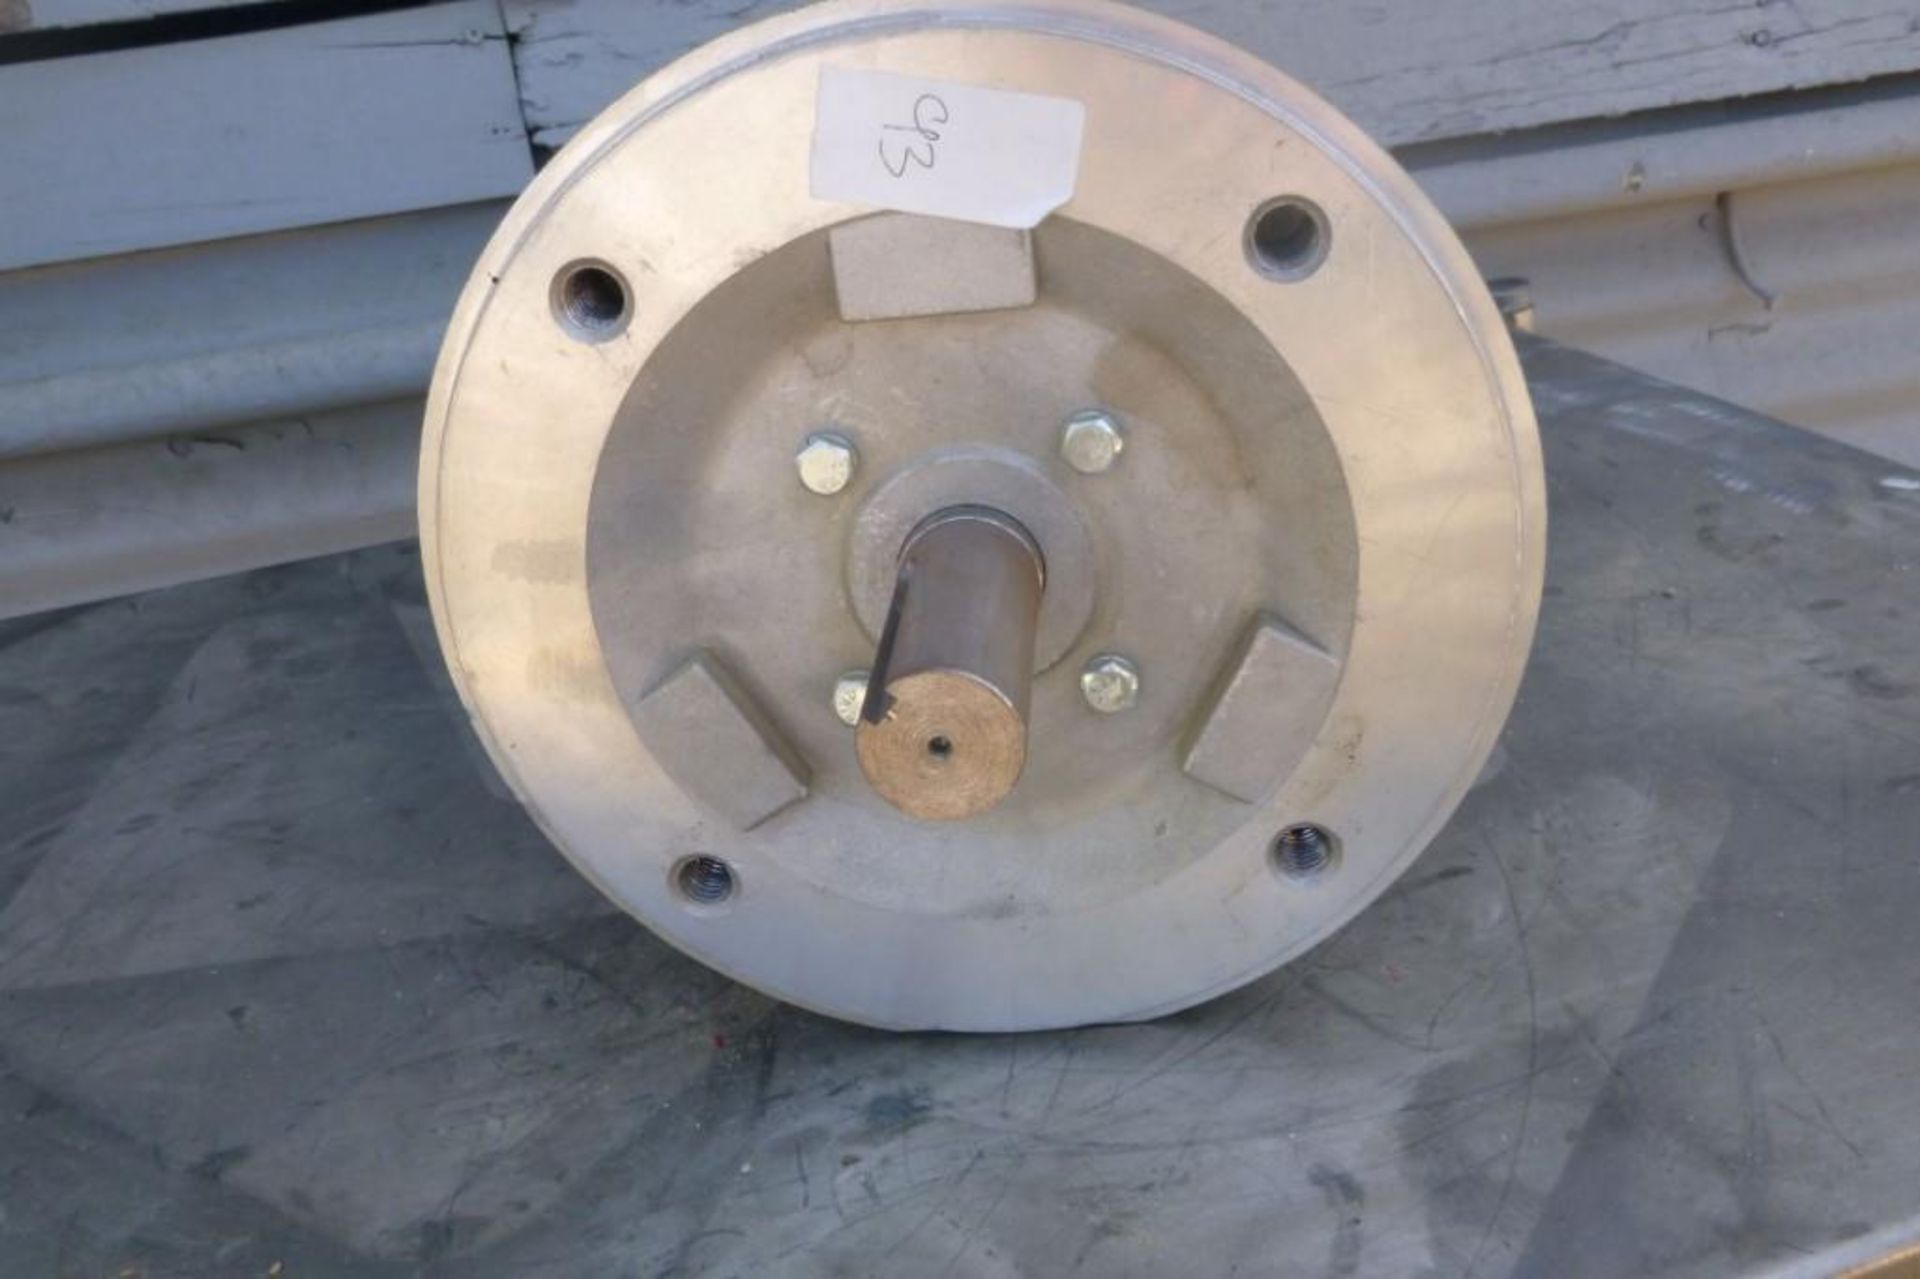 Motor, 3 HP, Baldor, 3450 RPM Out, 230/460V #C744063 (Loading Cost = $30) - Image 3 of 4